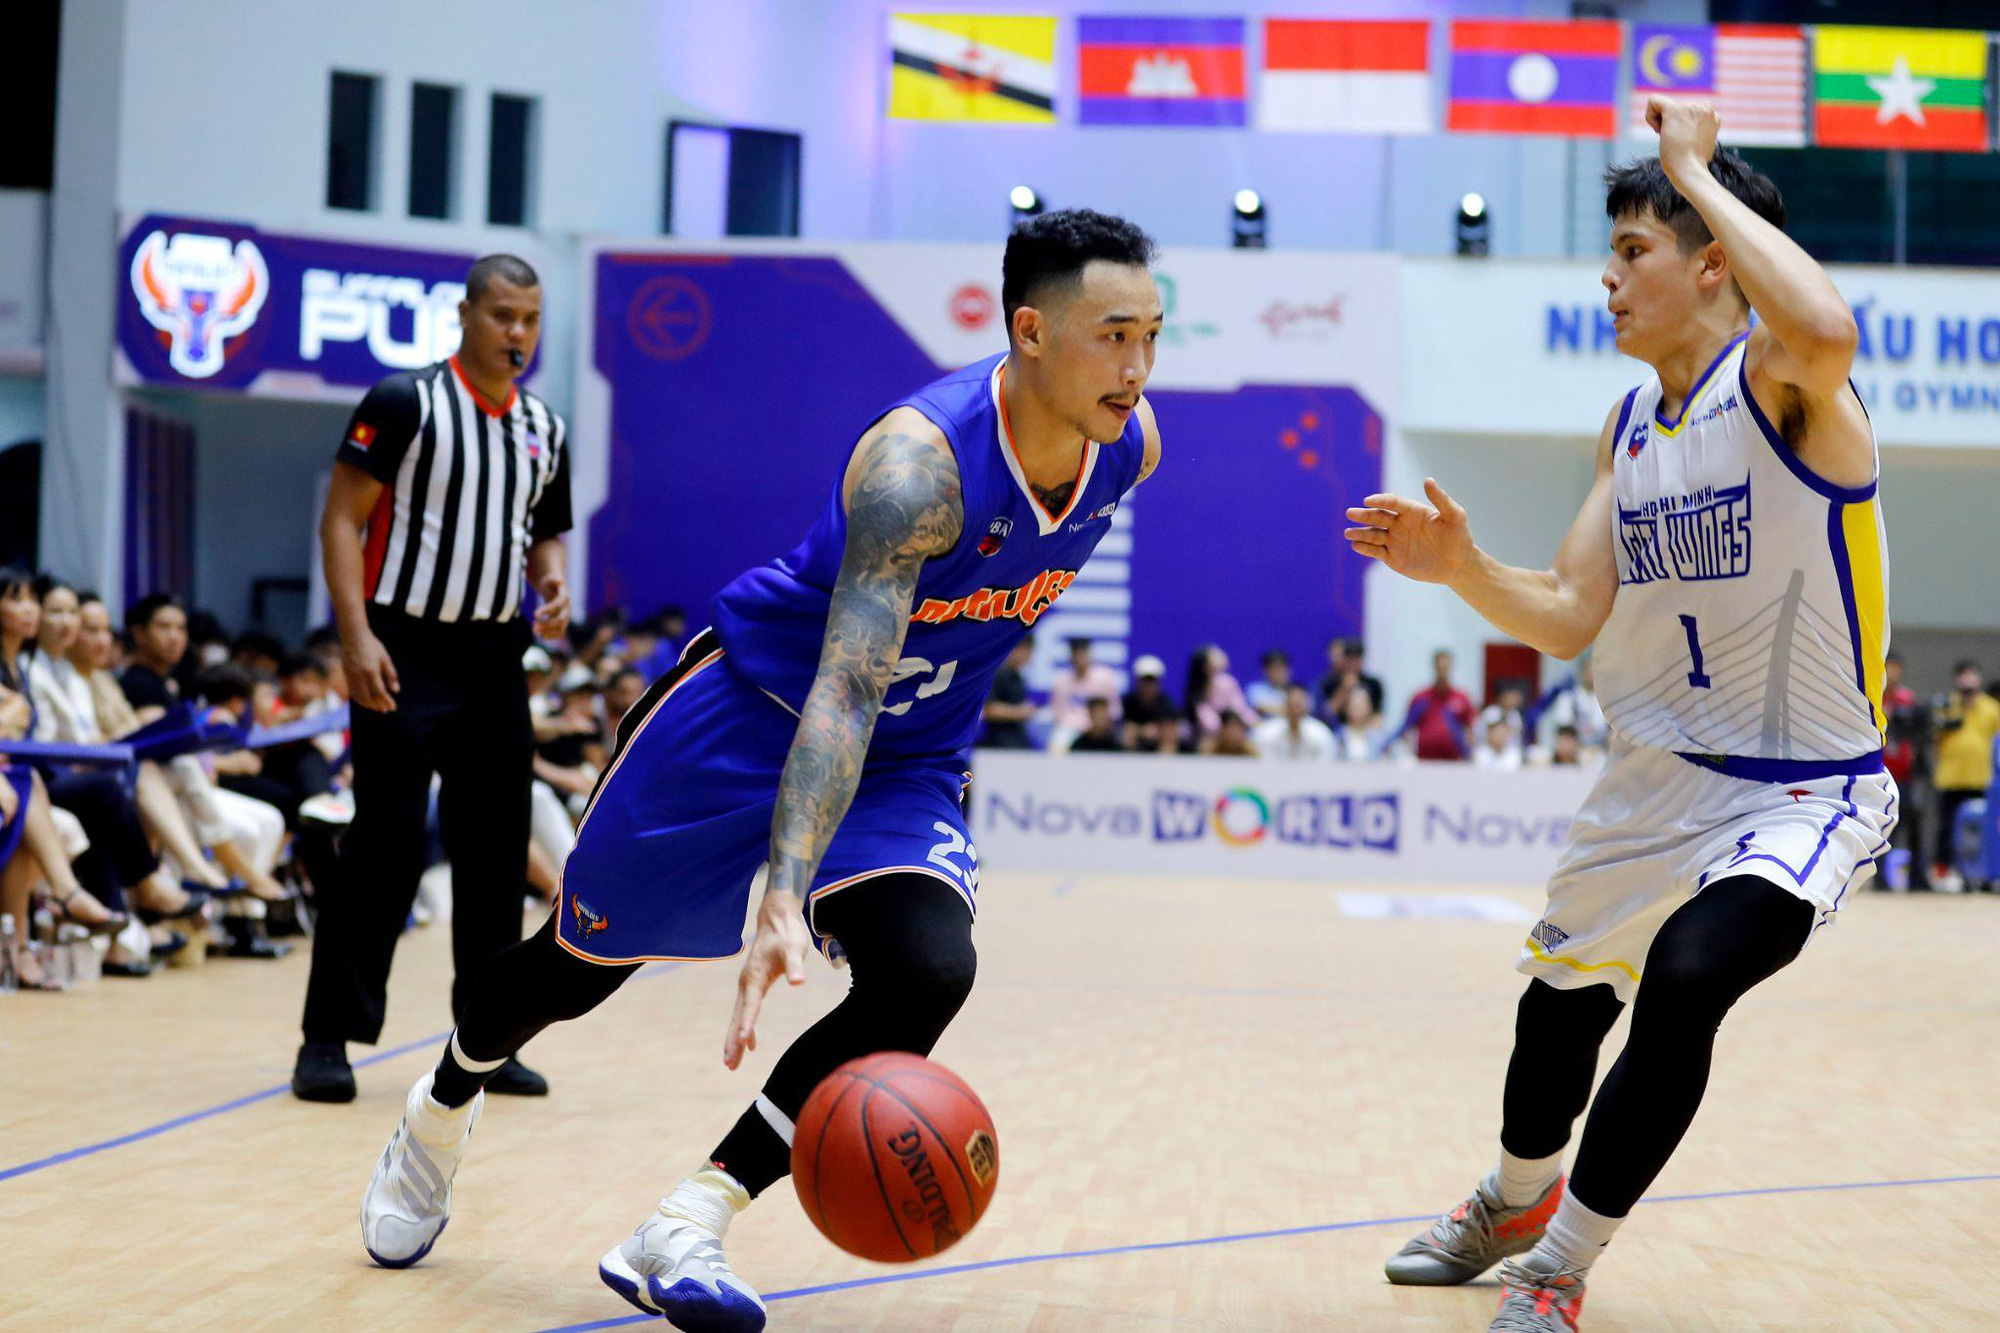 Dinh Thanh Tam (in dark blue) competes during a 2022 VBA game. Photo: VBA